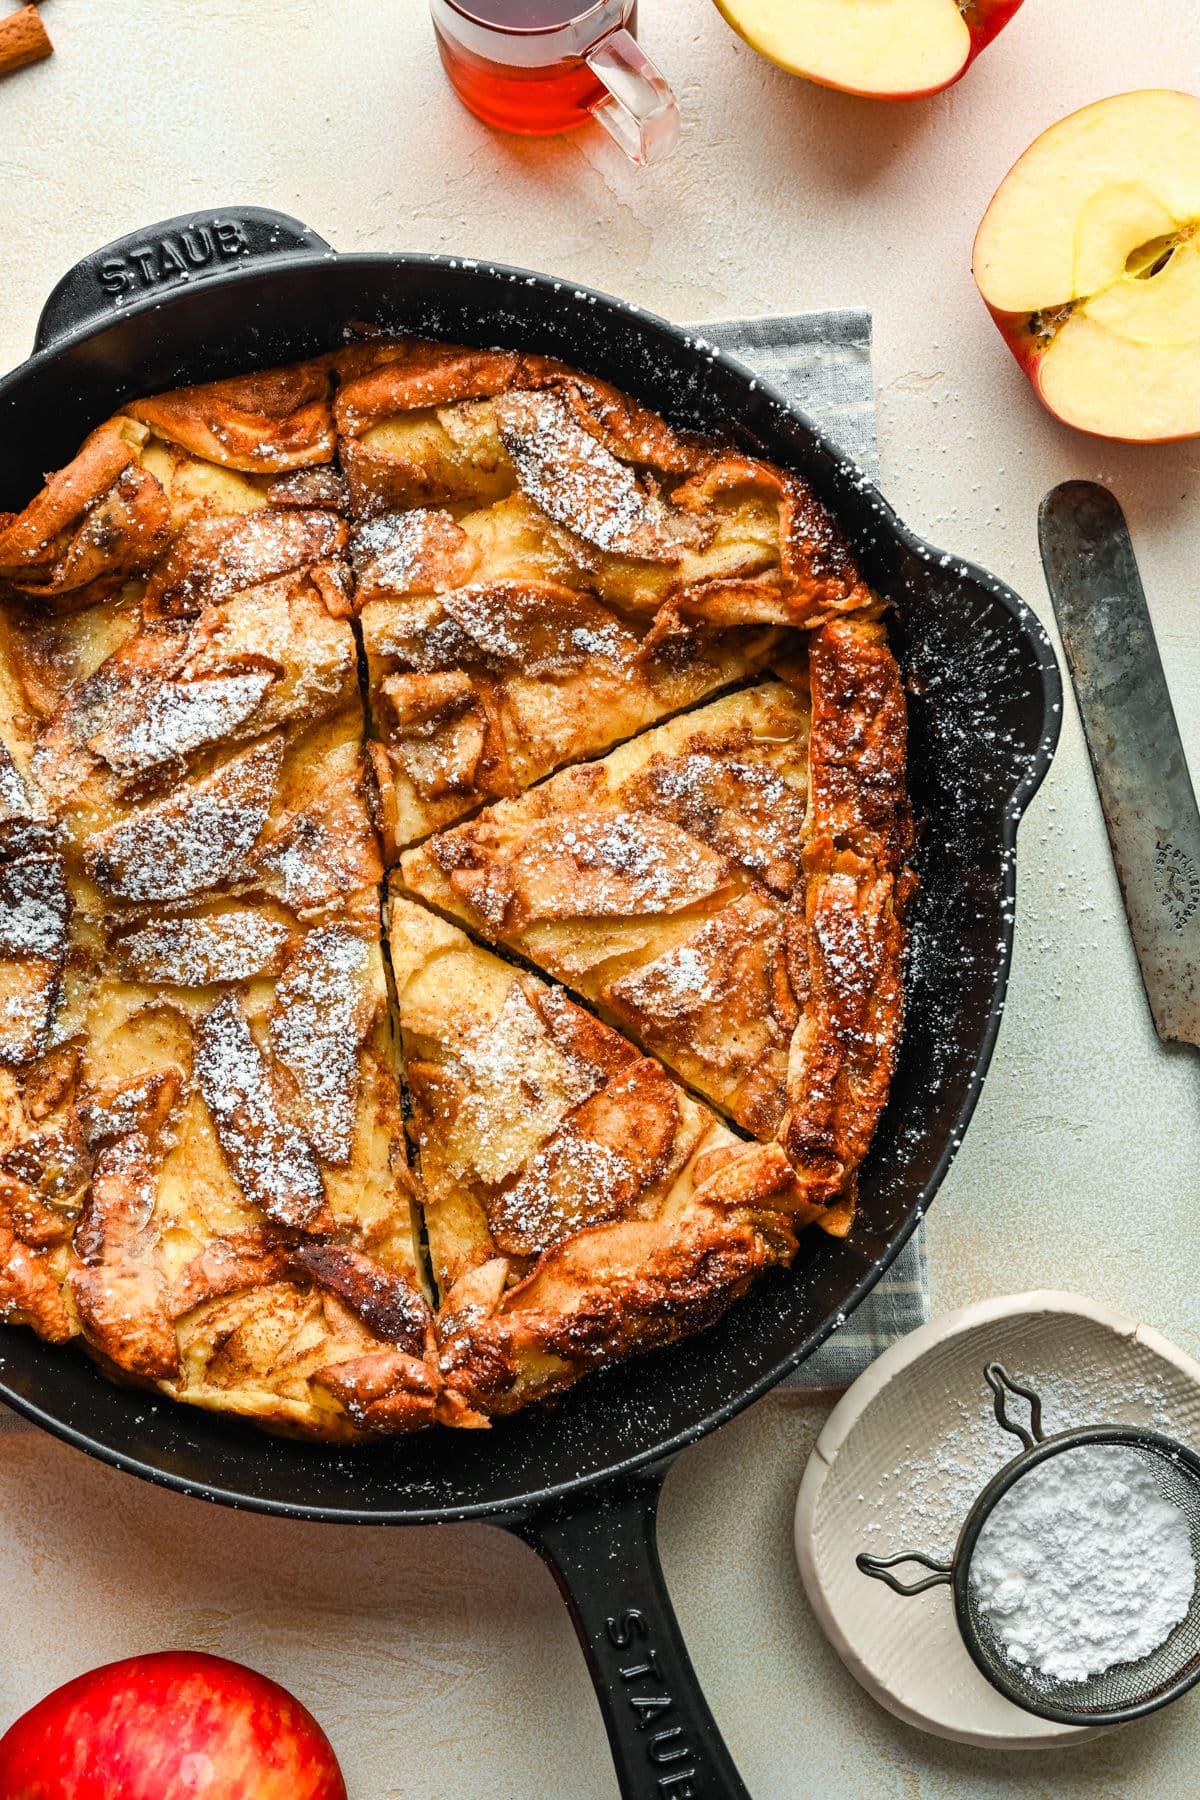 A powdered sugar dusted German apple pancake cut into pieces in a cast iron skillet.